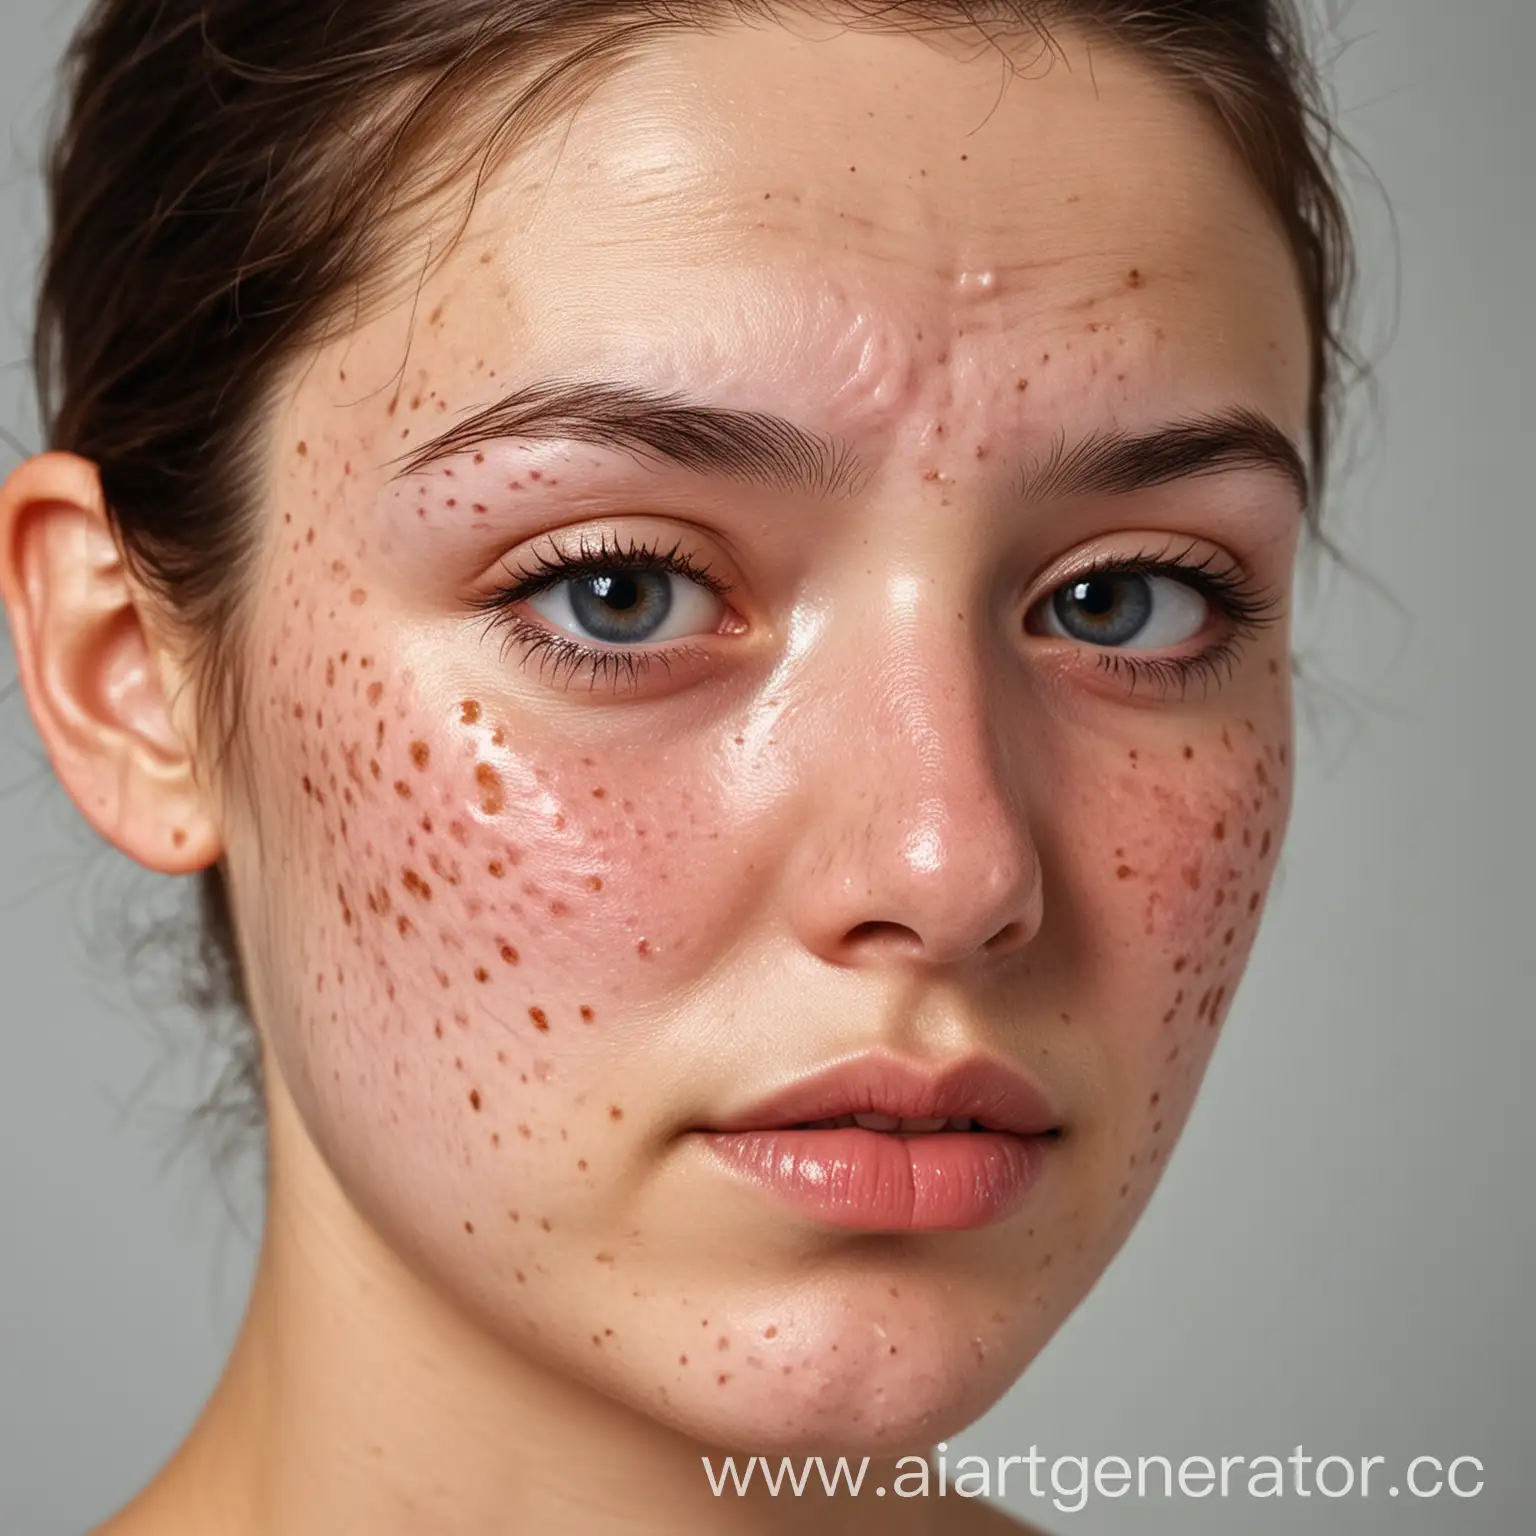 Person-with-Skin-Blemishes-and-Pimples-on-Face